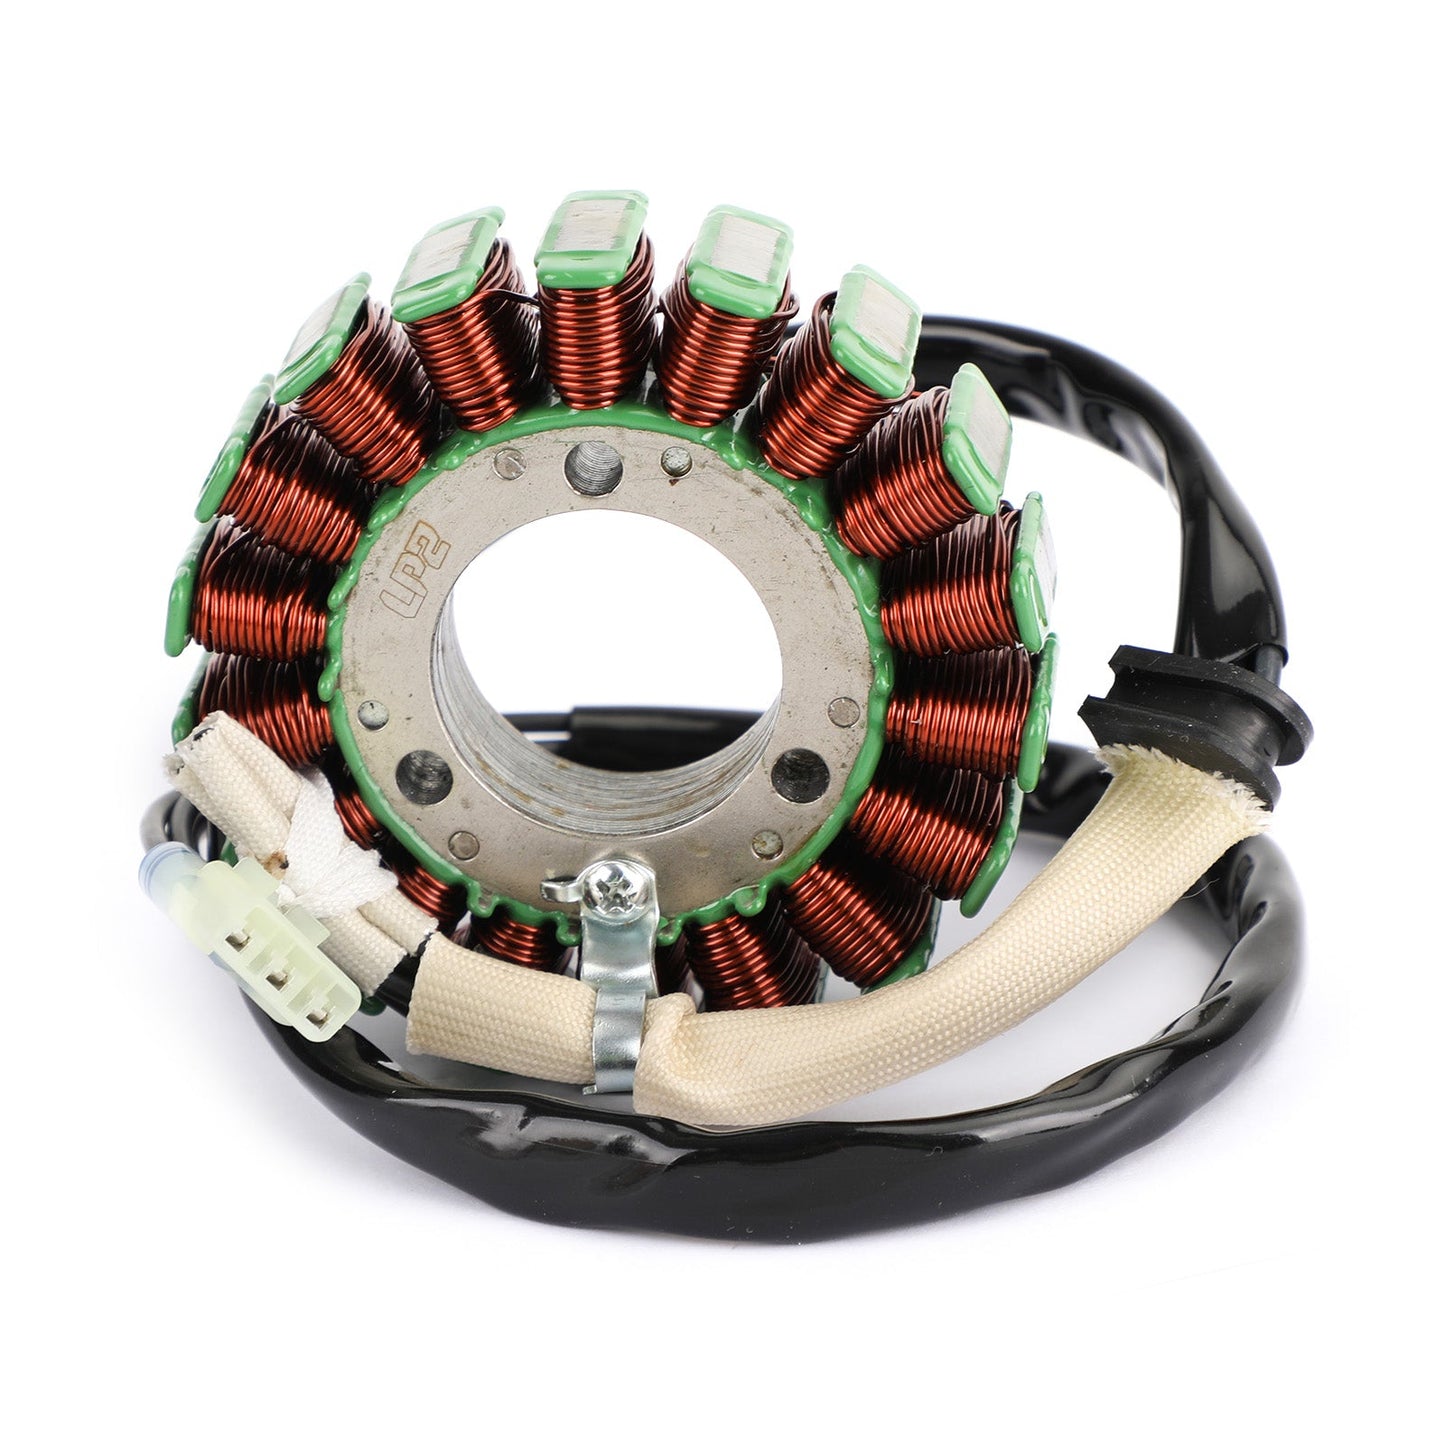 Magneto Generator Engine Stator Coil Fit For Beta RR 4T 350 390 430 480, Racing 006101200000